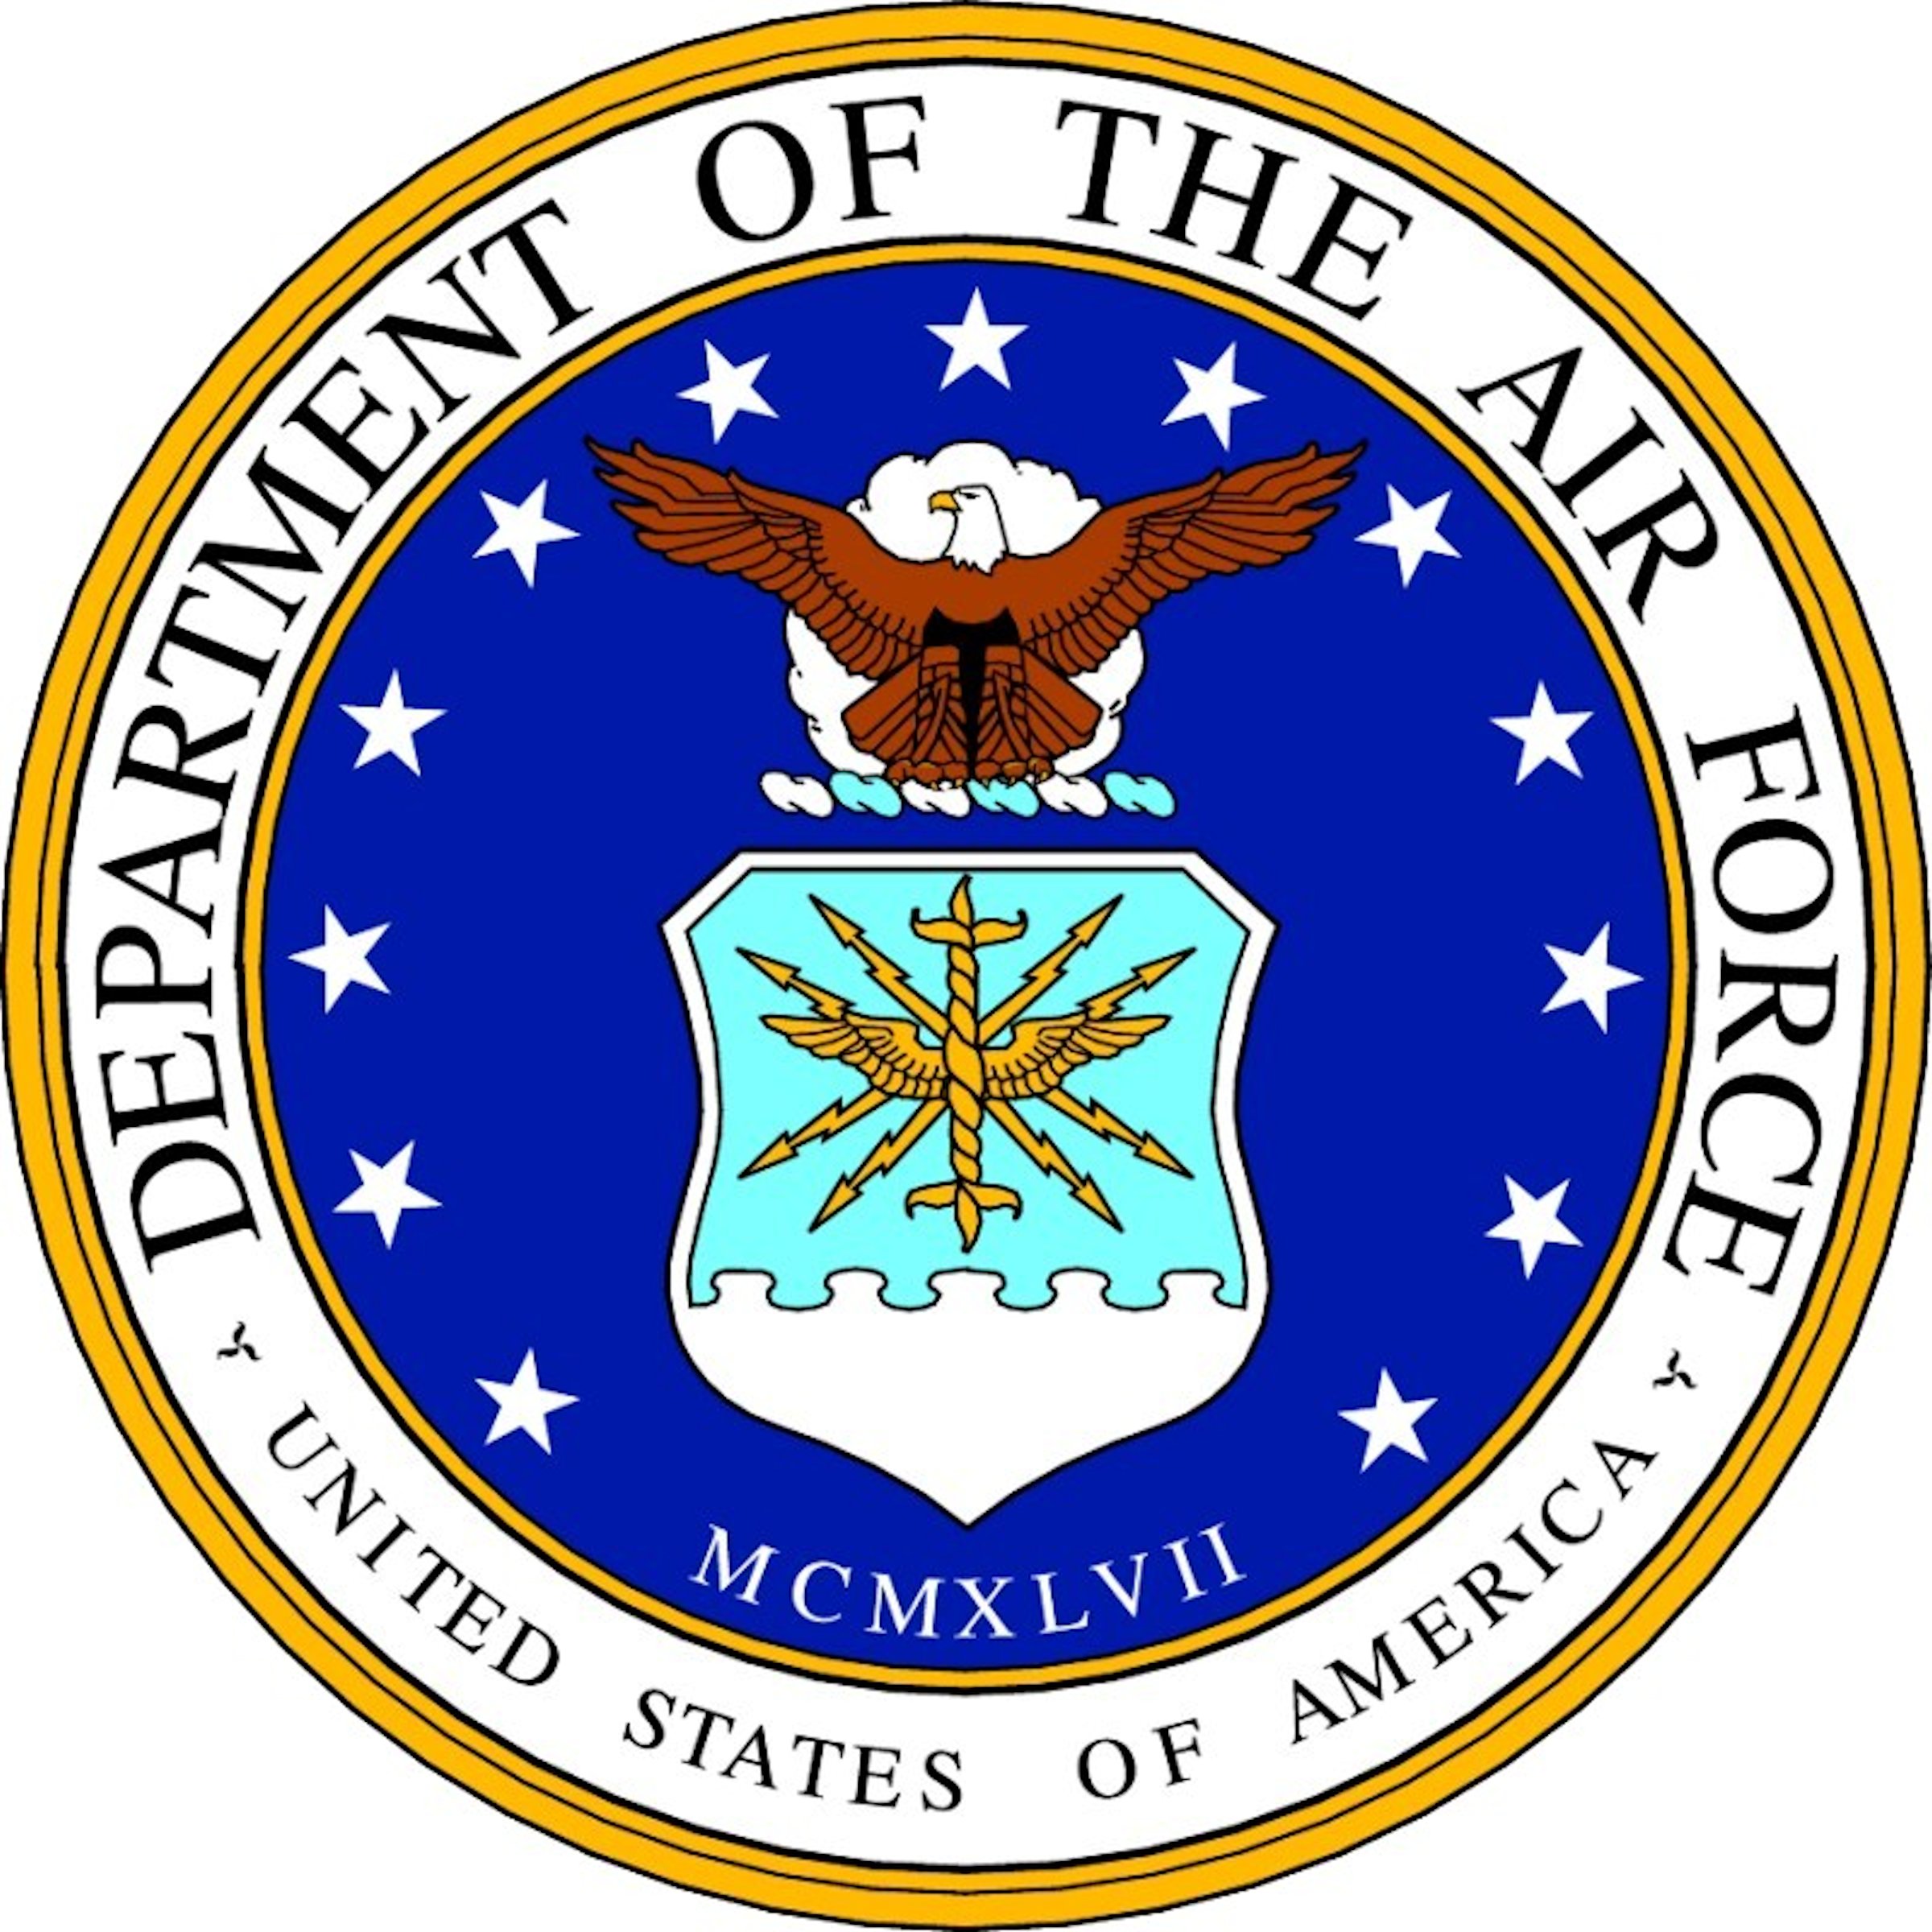 Air Force Seal high resolution full color